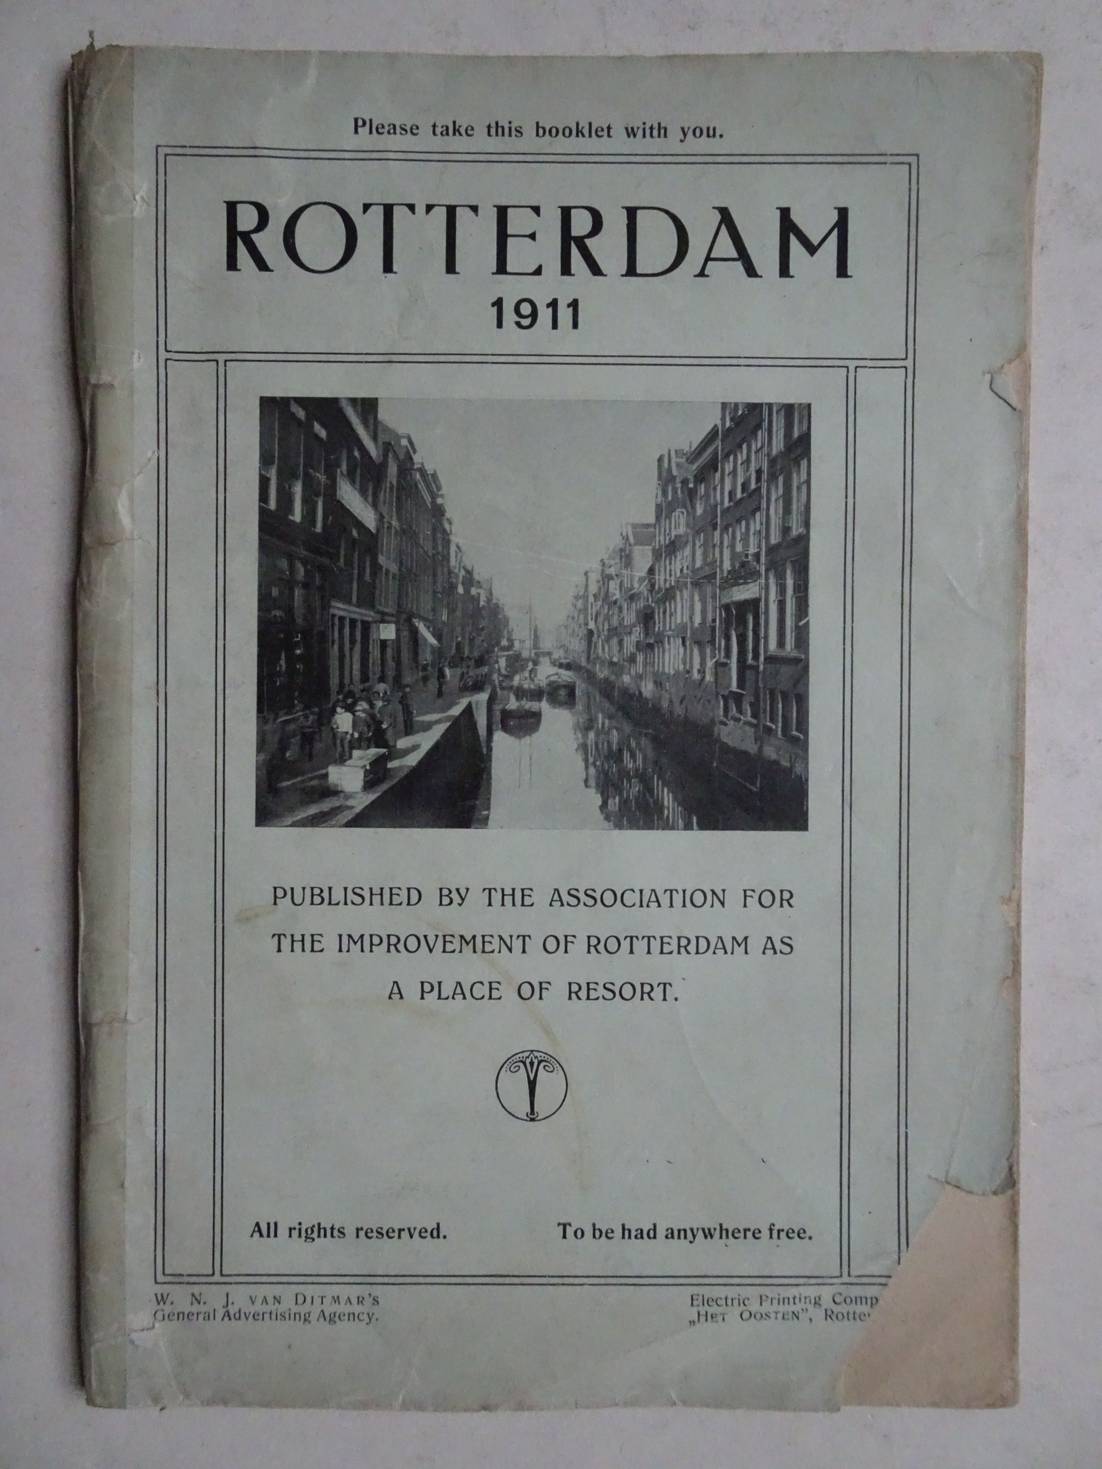 -. - Rotterdam 1911. Published by the association for the improvement of Rotterdam as a place of resort.